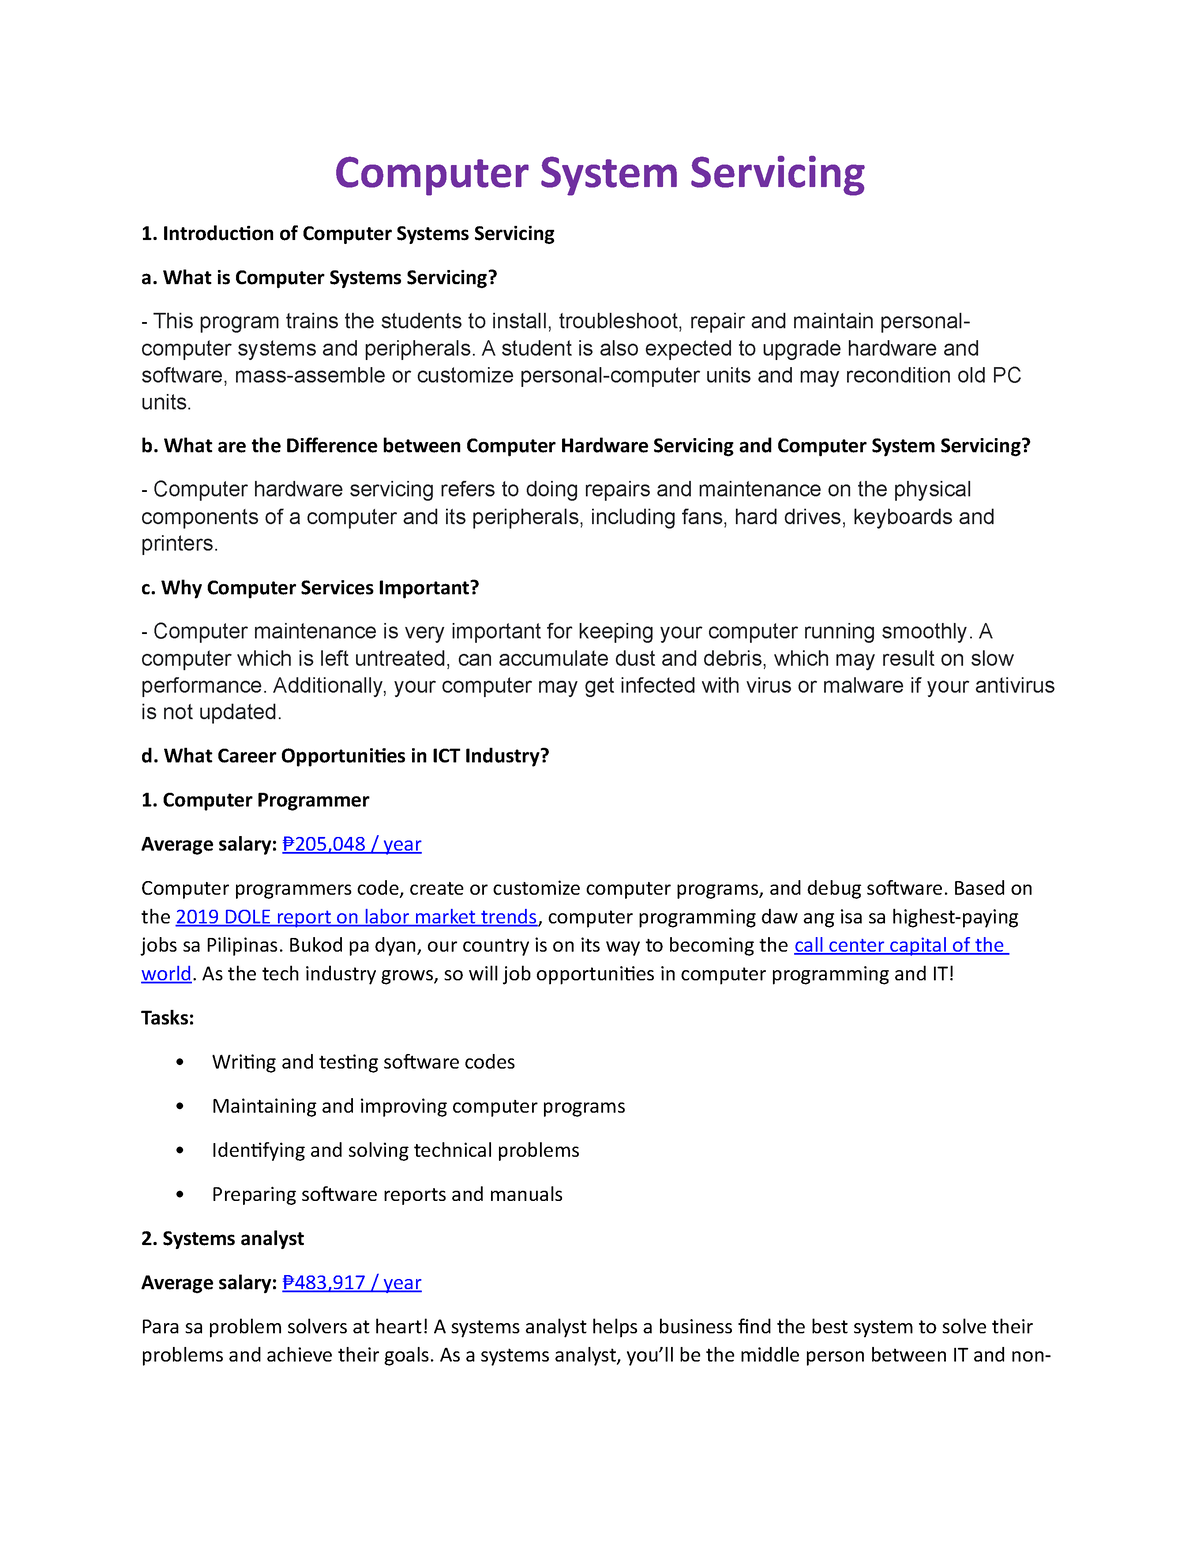 essay about computer system servicing